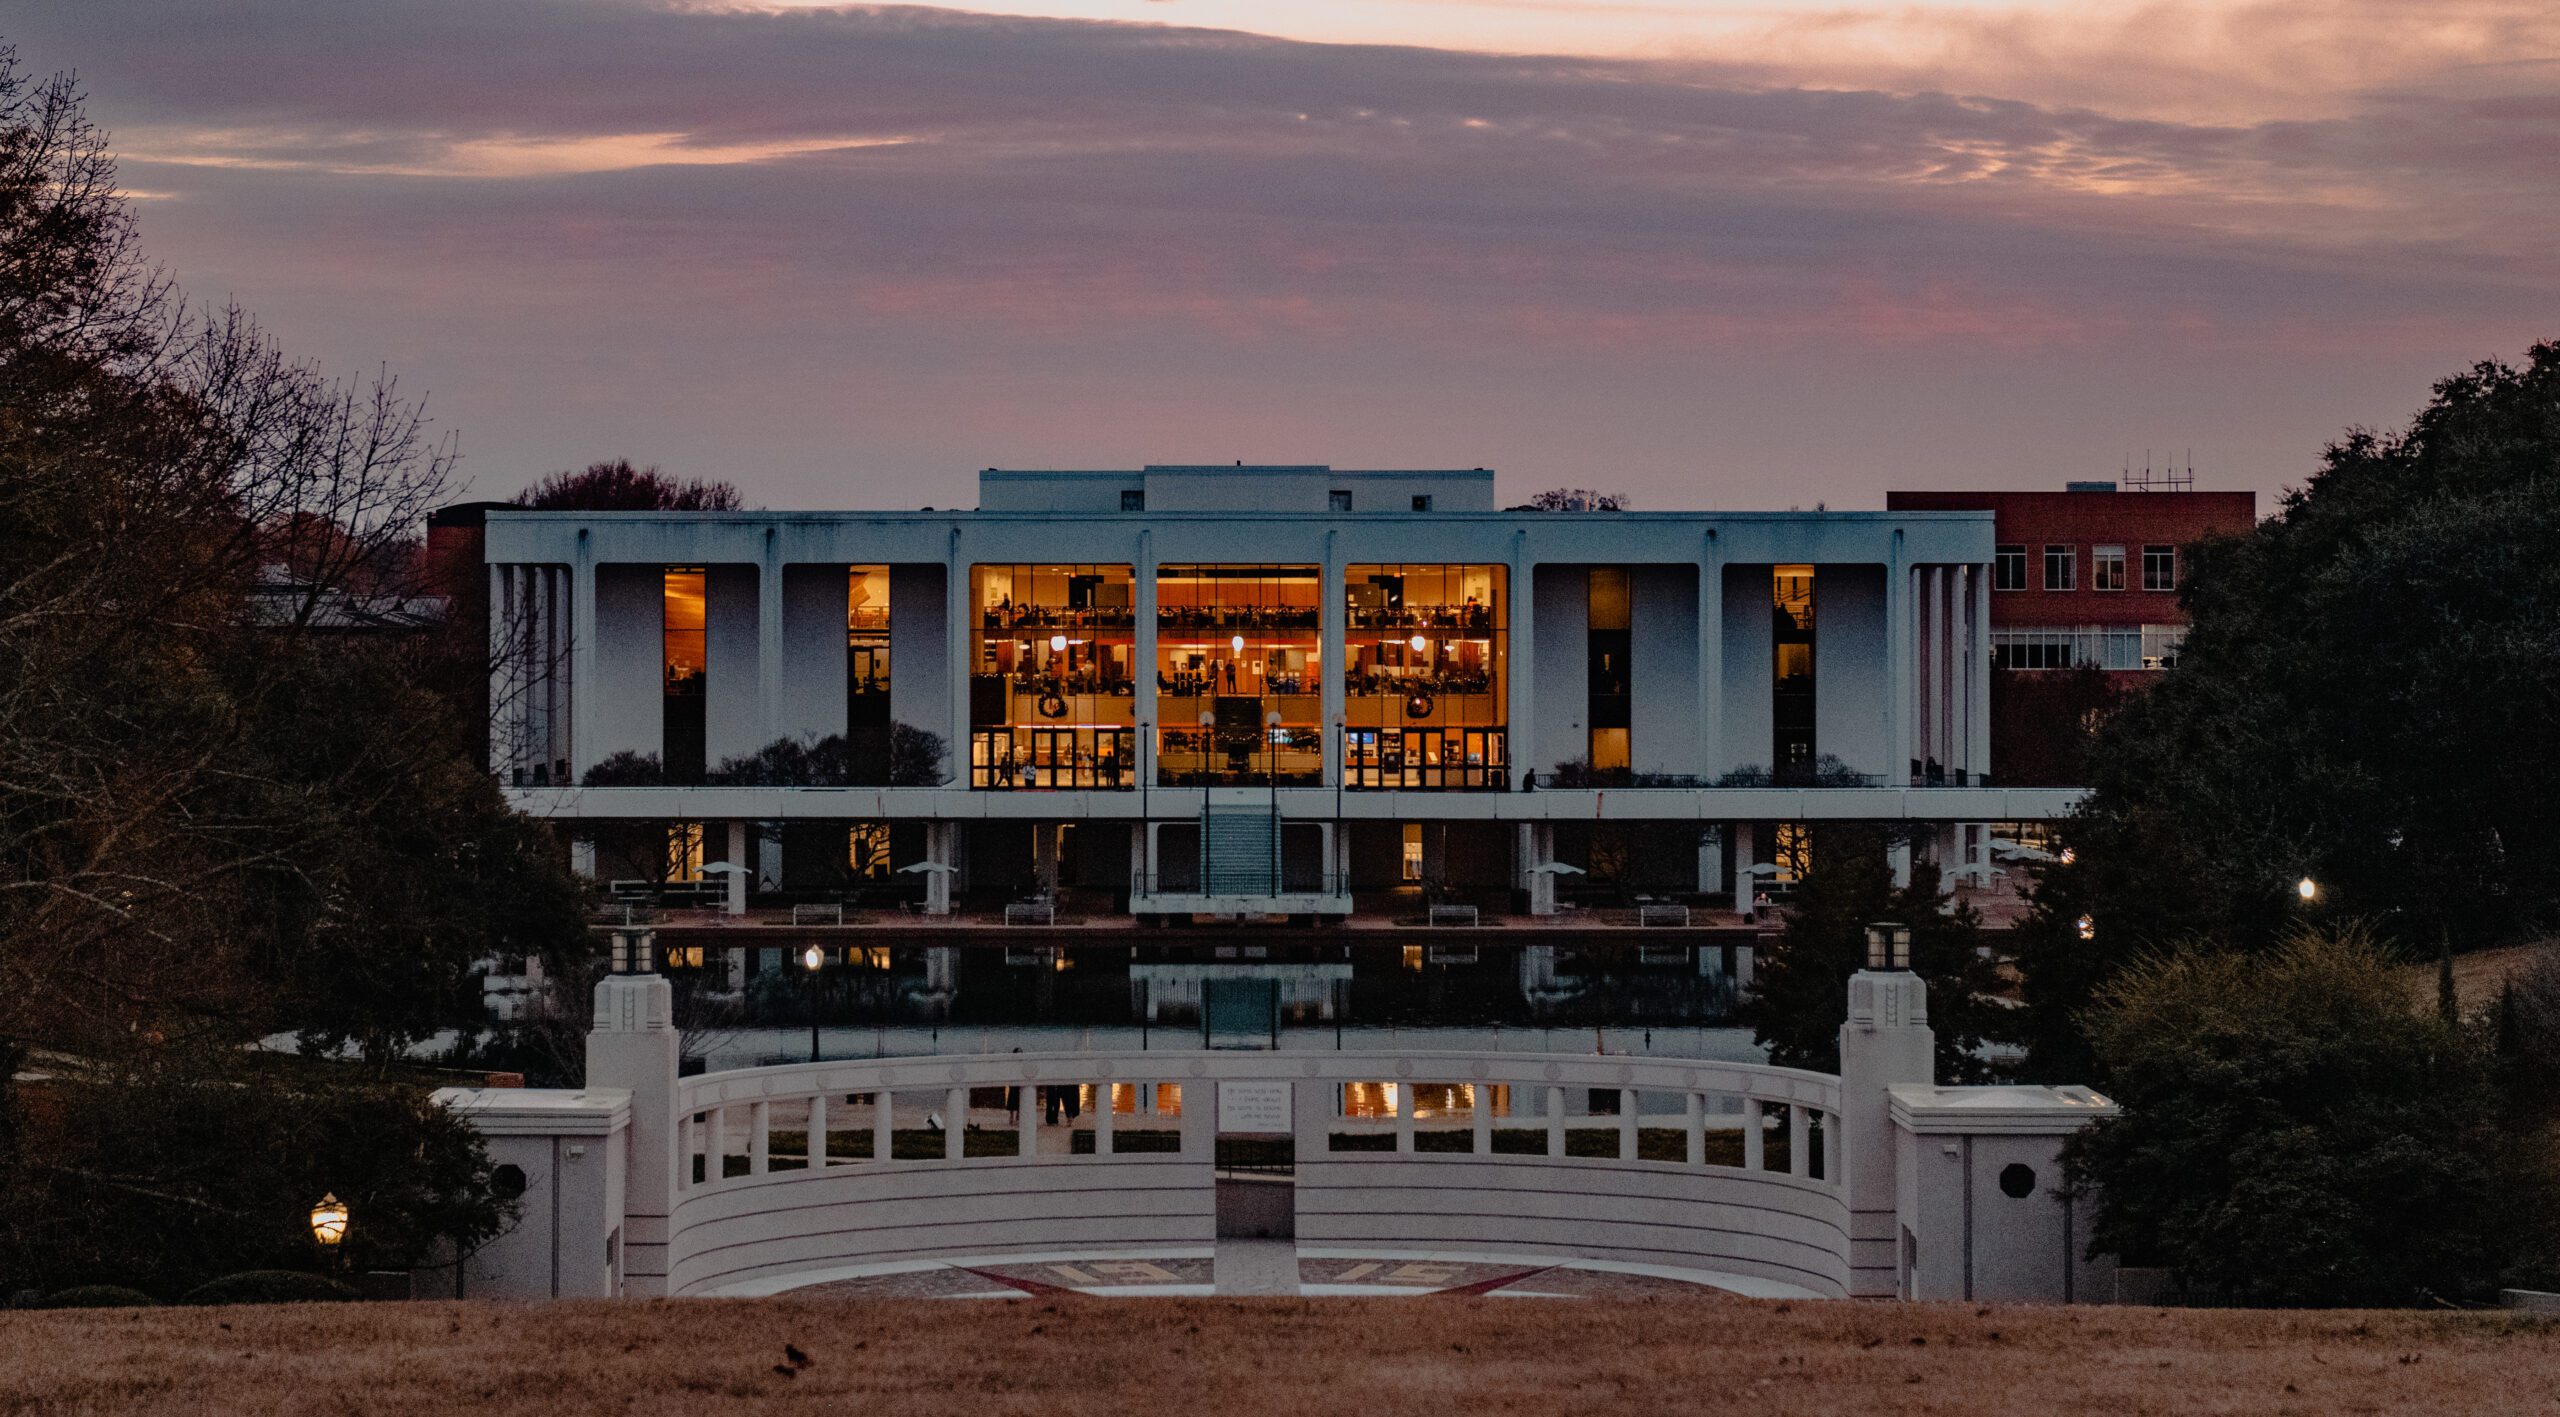 Clemson University's RM Cooper Library viewed from the amphitheater at sunset